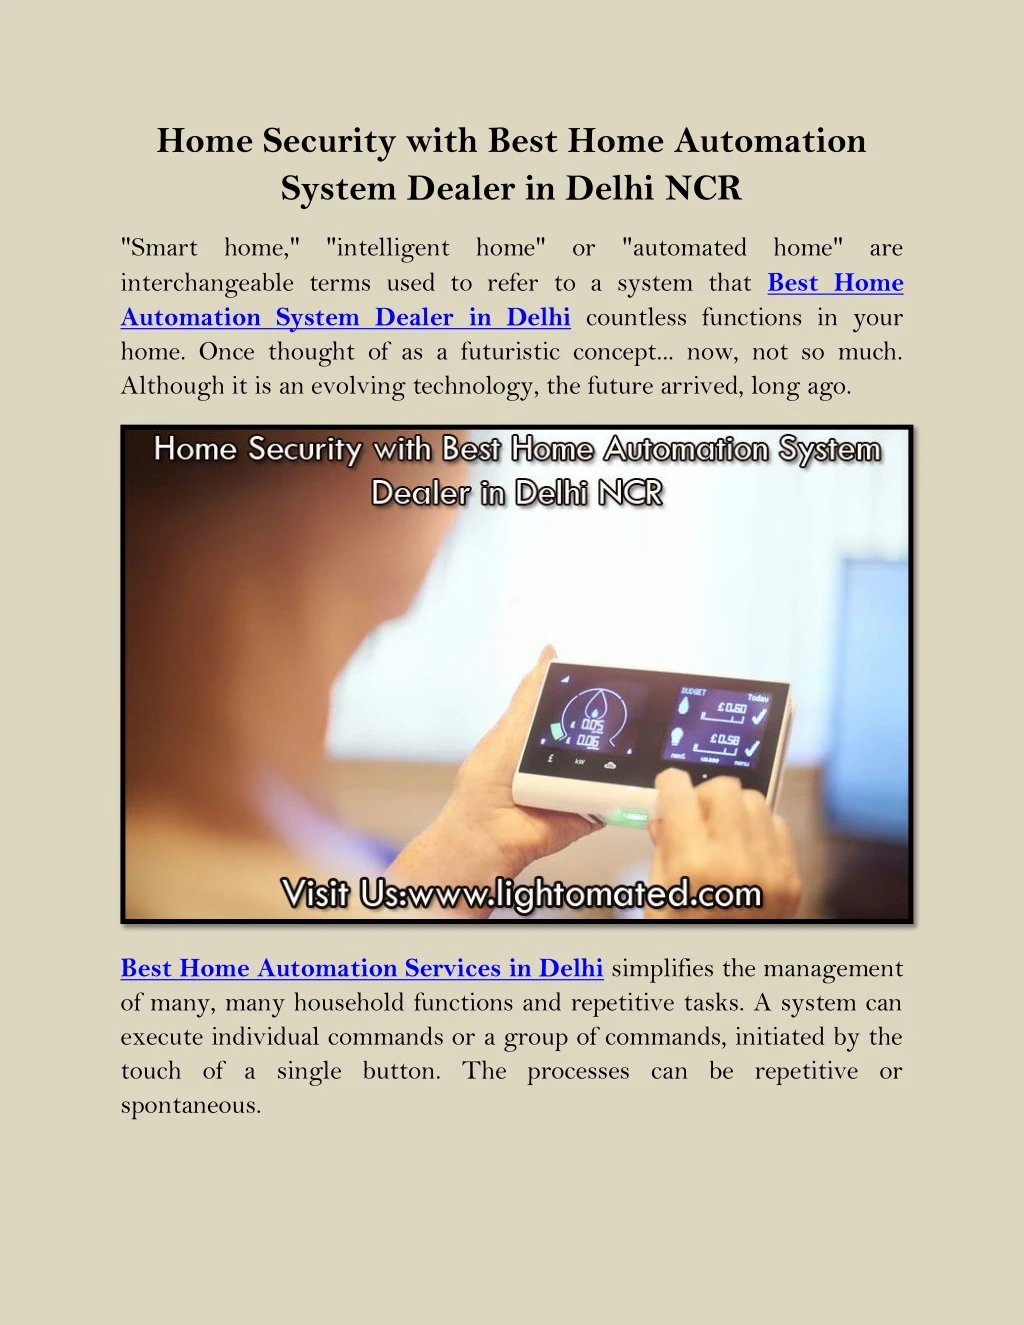 home security with best home automation system